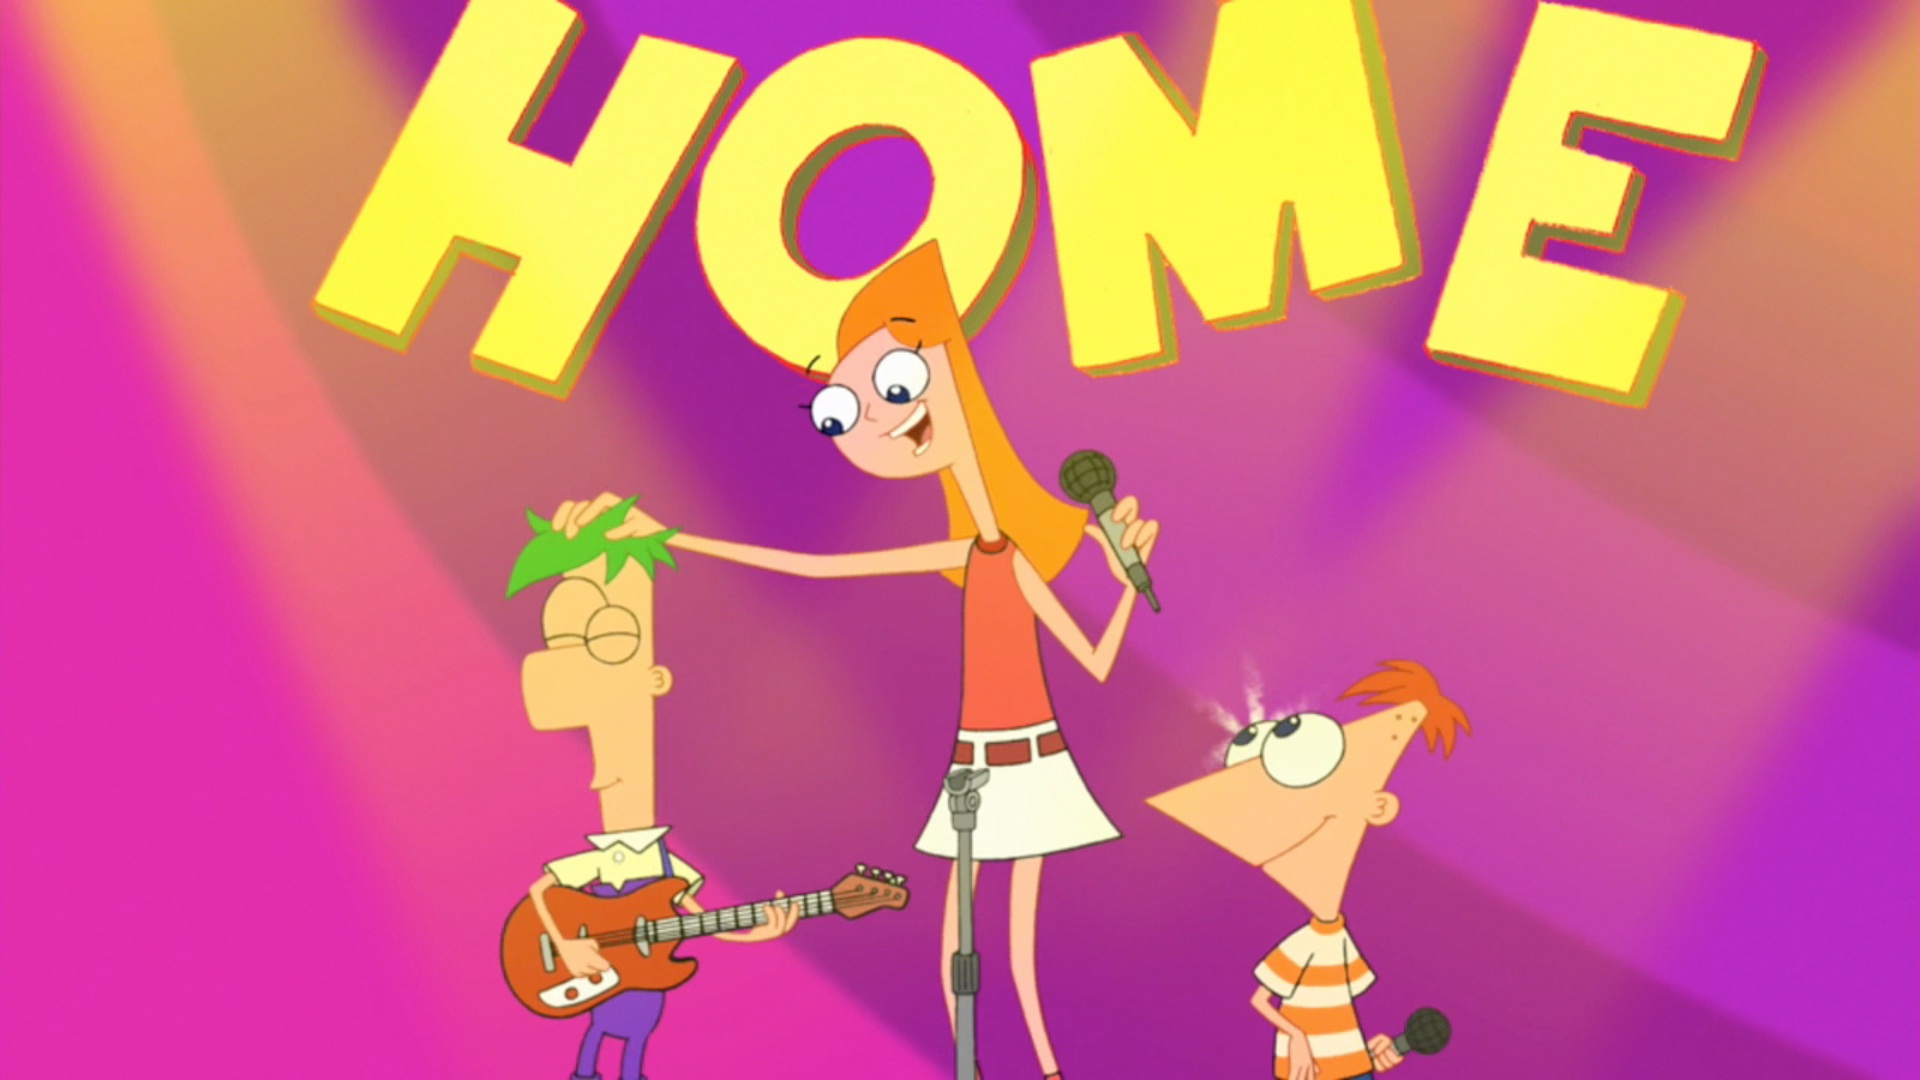 Candace Phineas And Ferb Wiki Fandom Powered Wikia 13